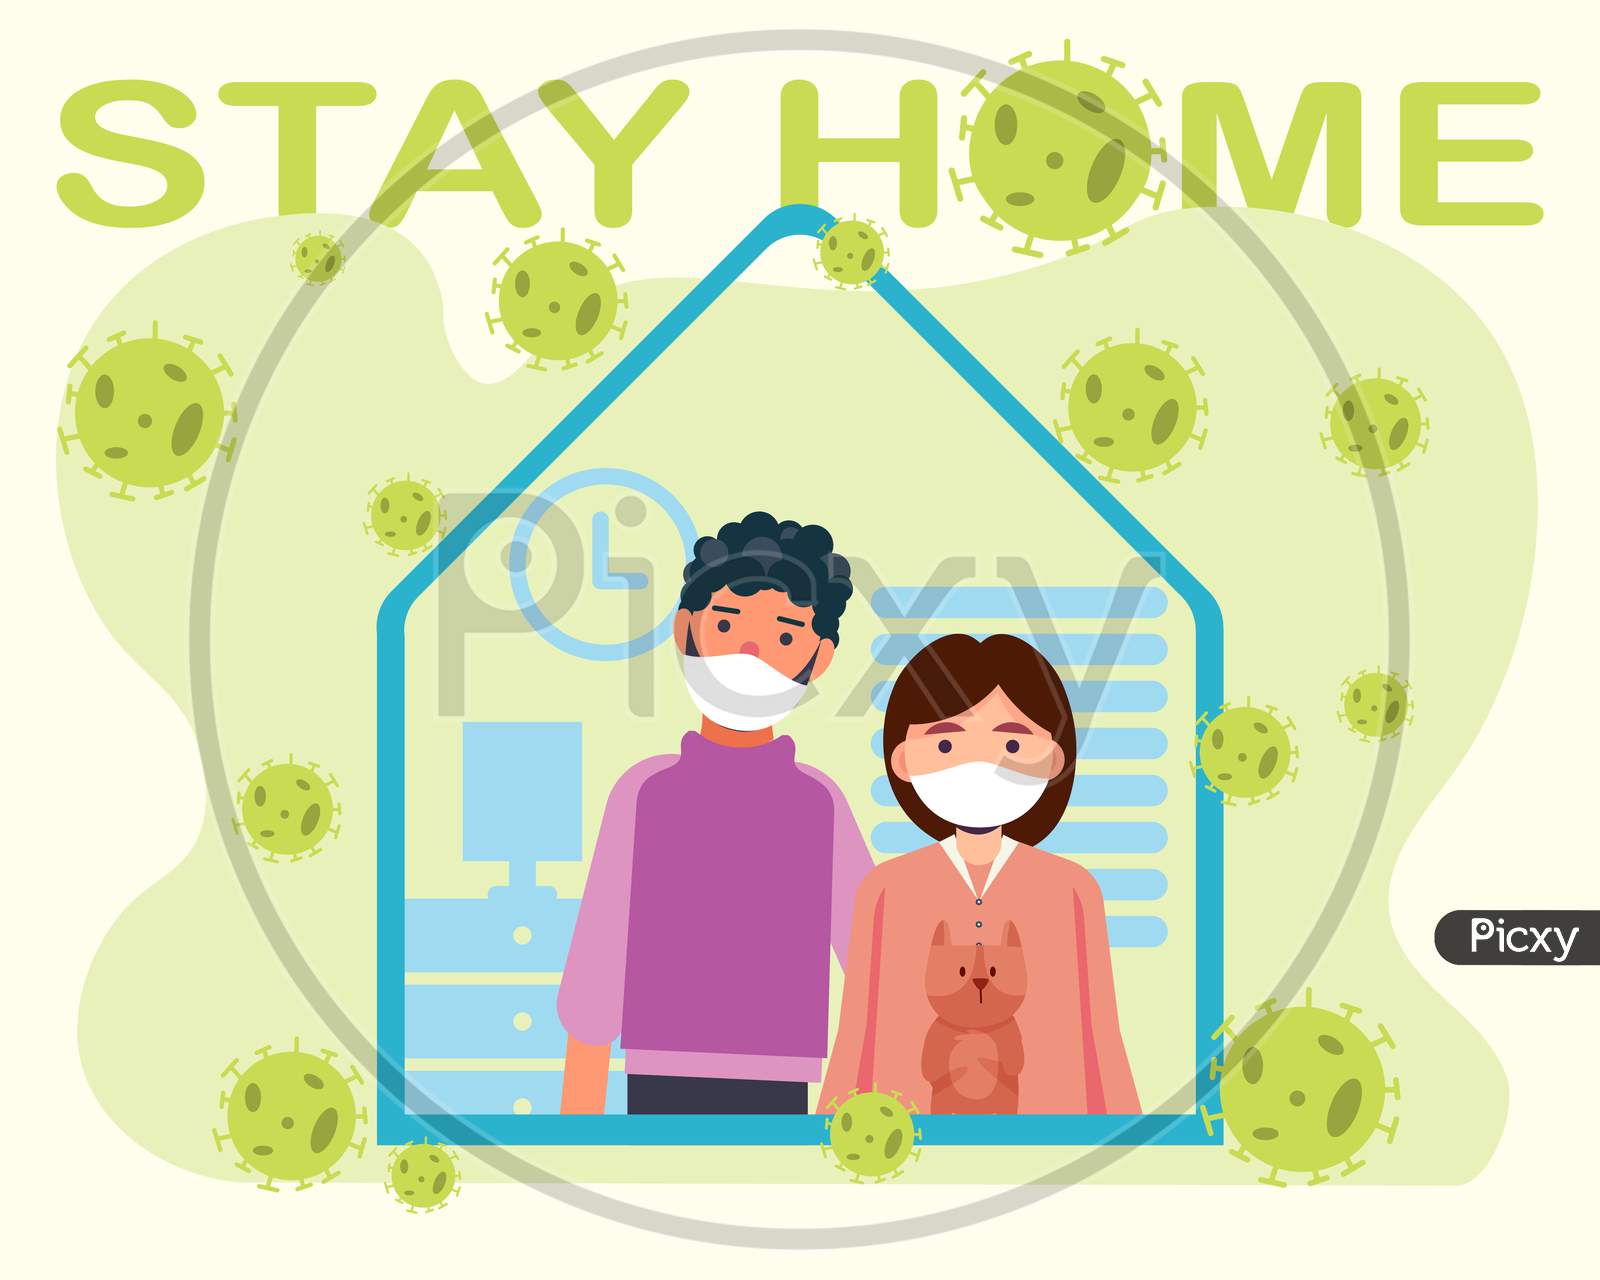 stay home in lock down and pandemic due to coronavirus cartoon illustration vector, family at home